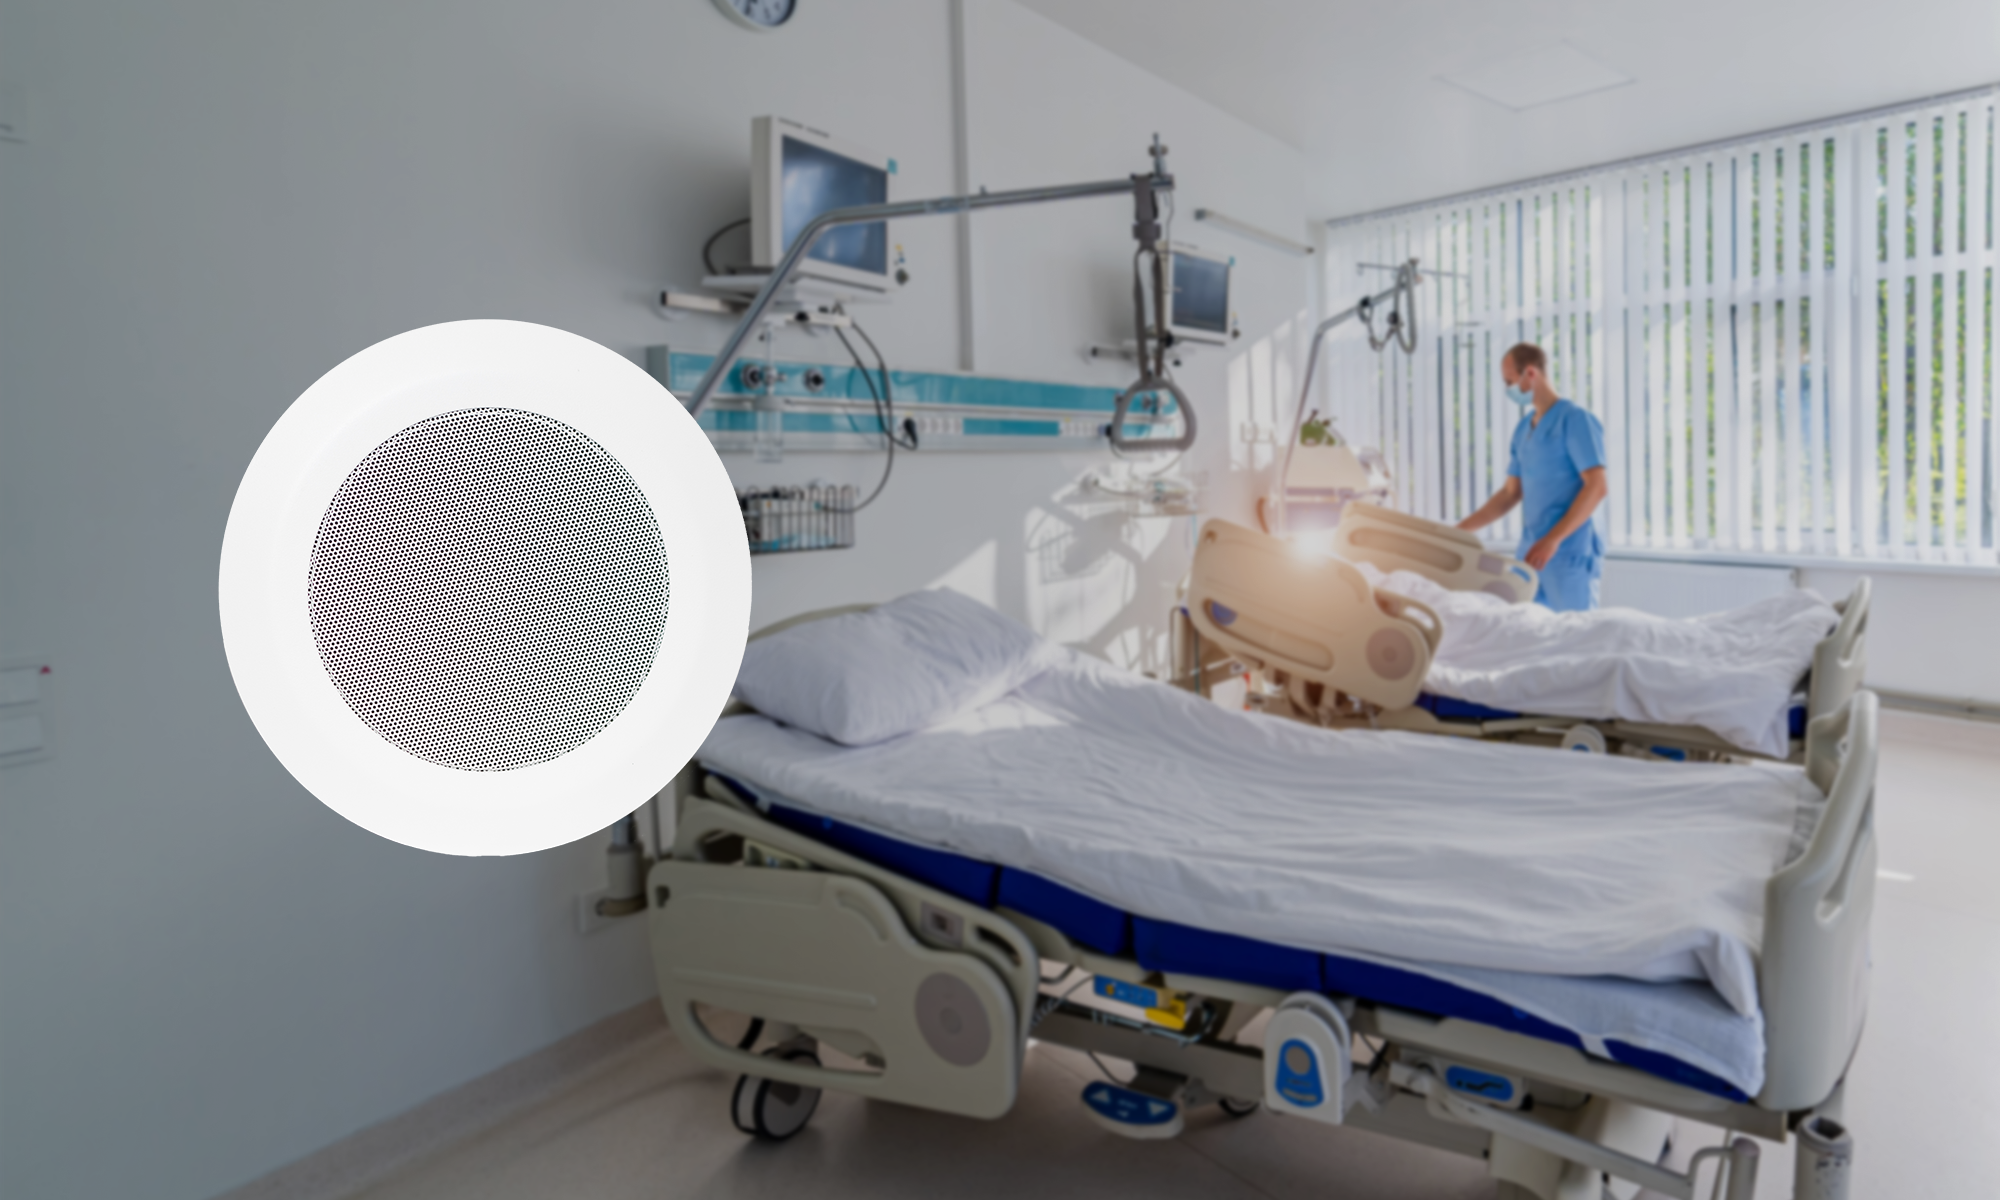 sound-masking-on-round-ceiling-ip-speaker-in-healthcare-facility